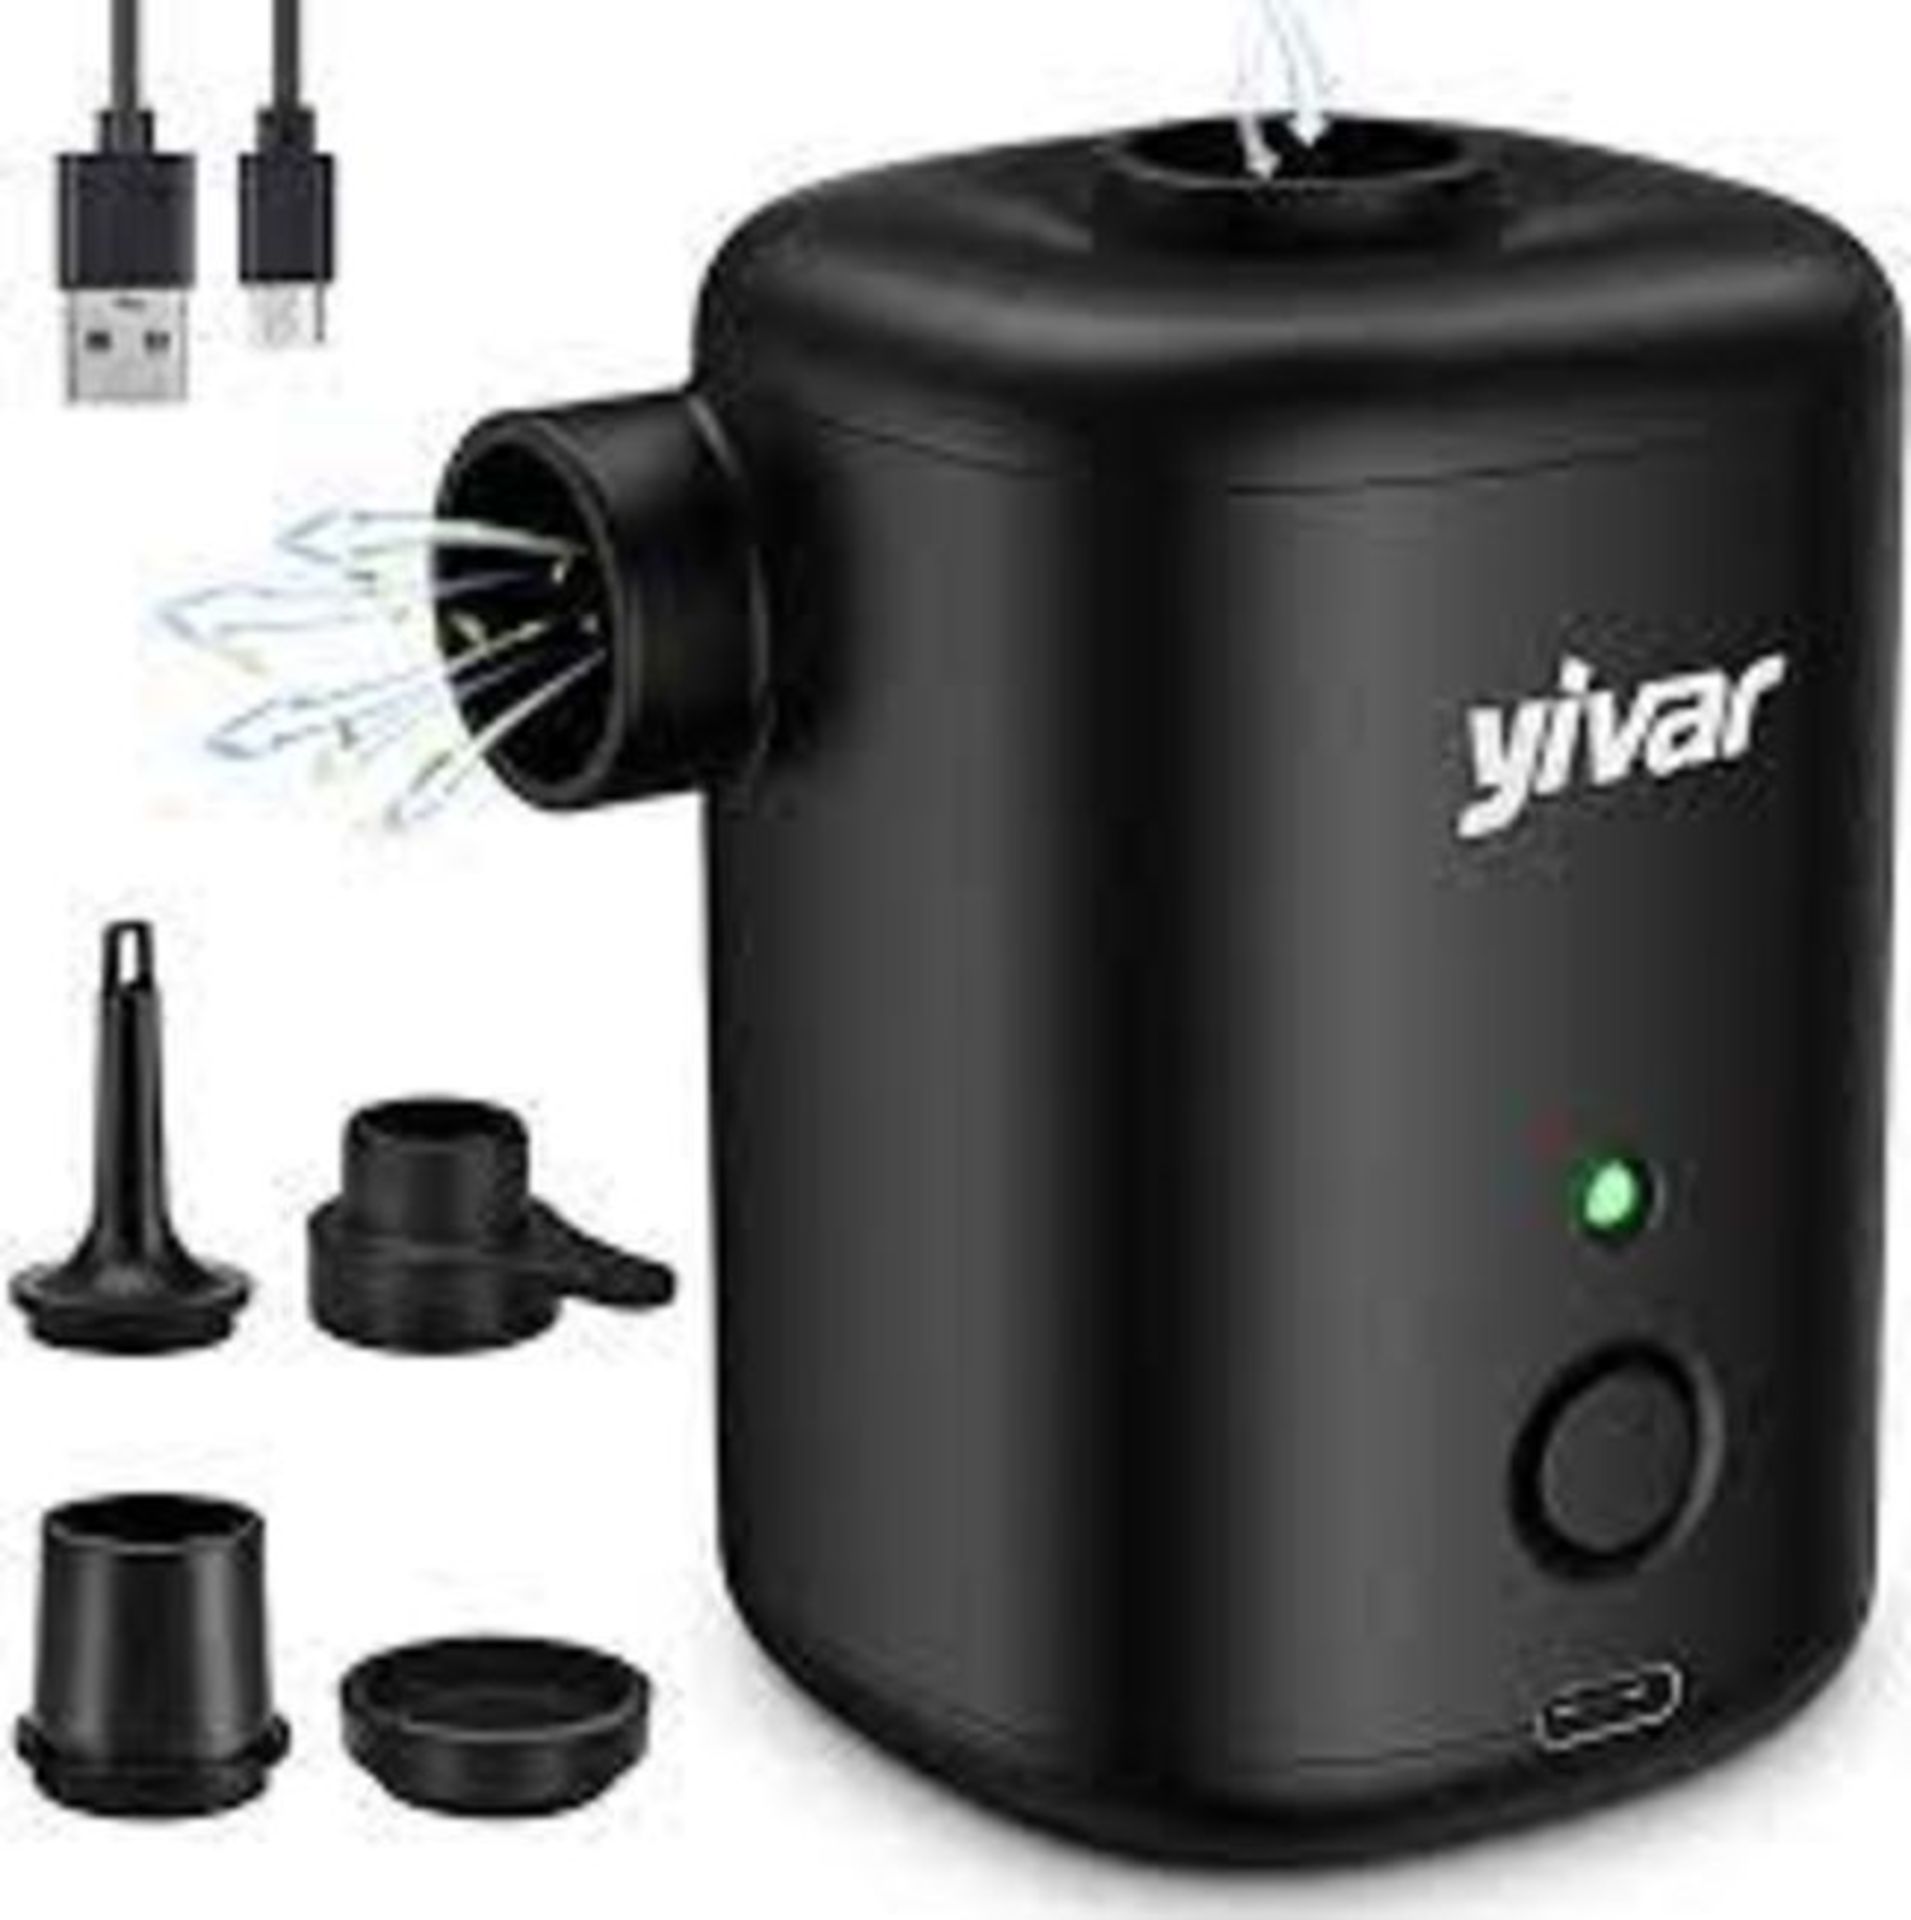 Yivar Electric Air Pump - Portable Air Pump For Inflatable Wireless - Image 2 of 3